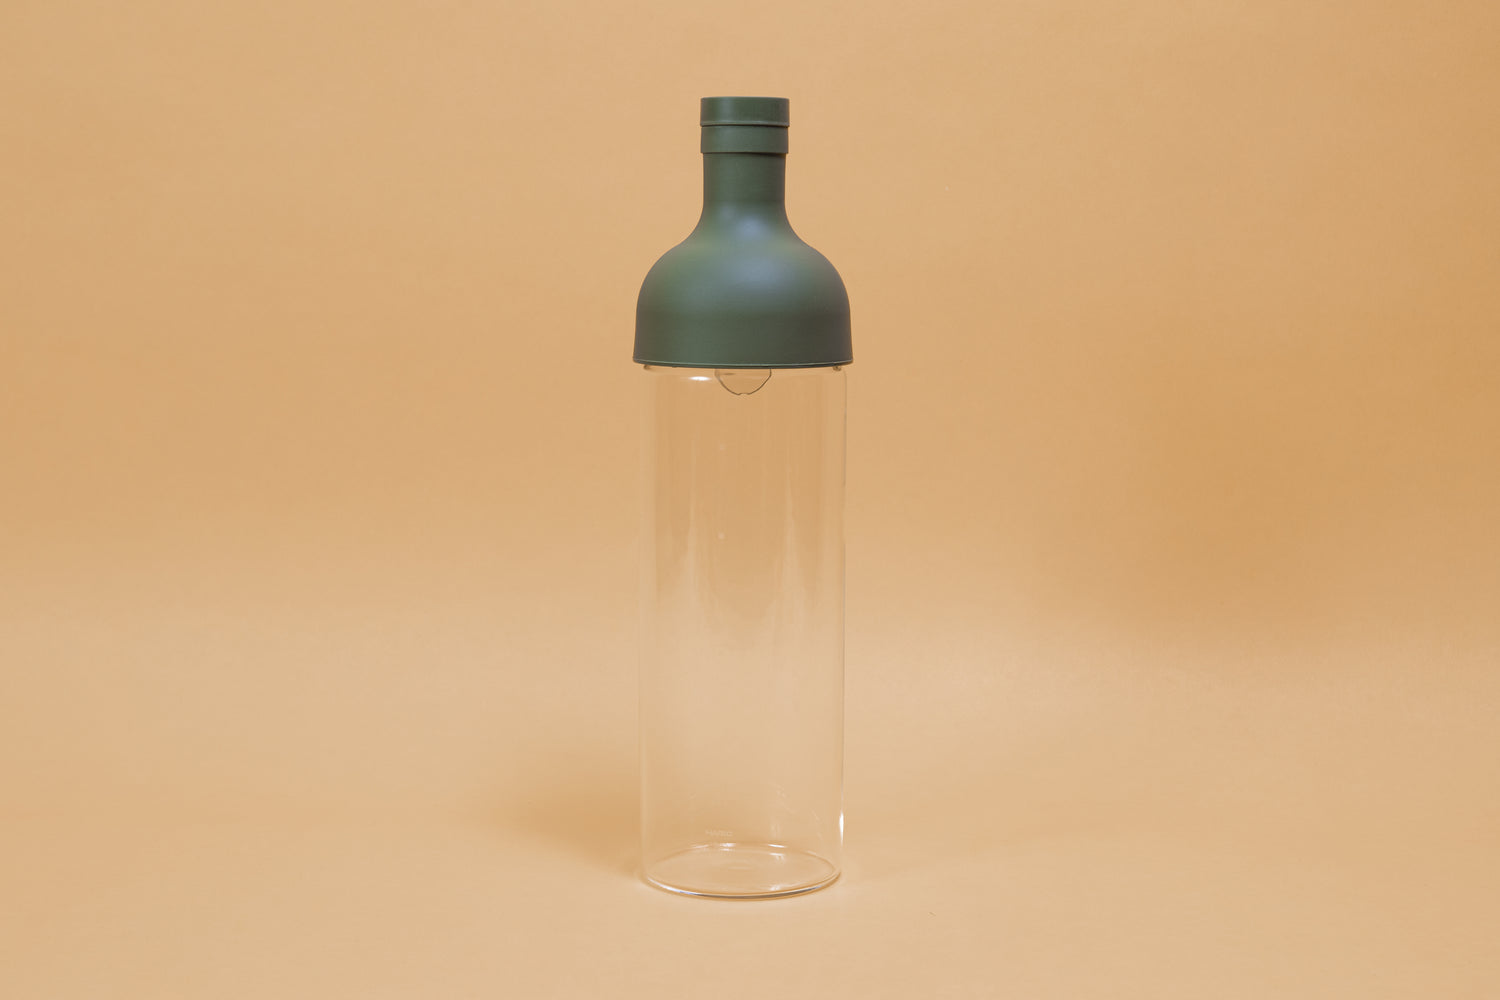 Tall glass container with green rubber wine bottle shaped top on an orange backdrop.